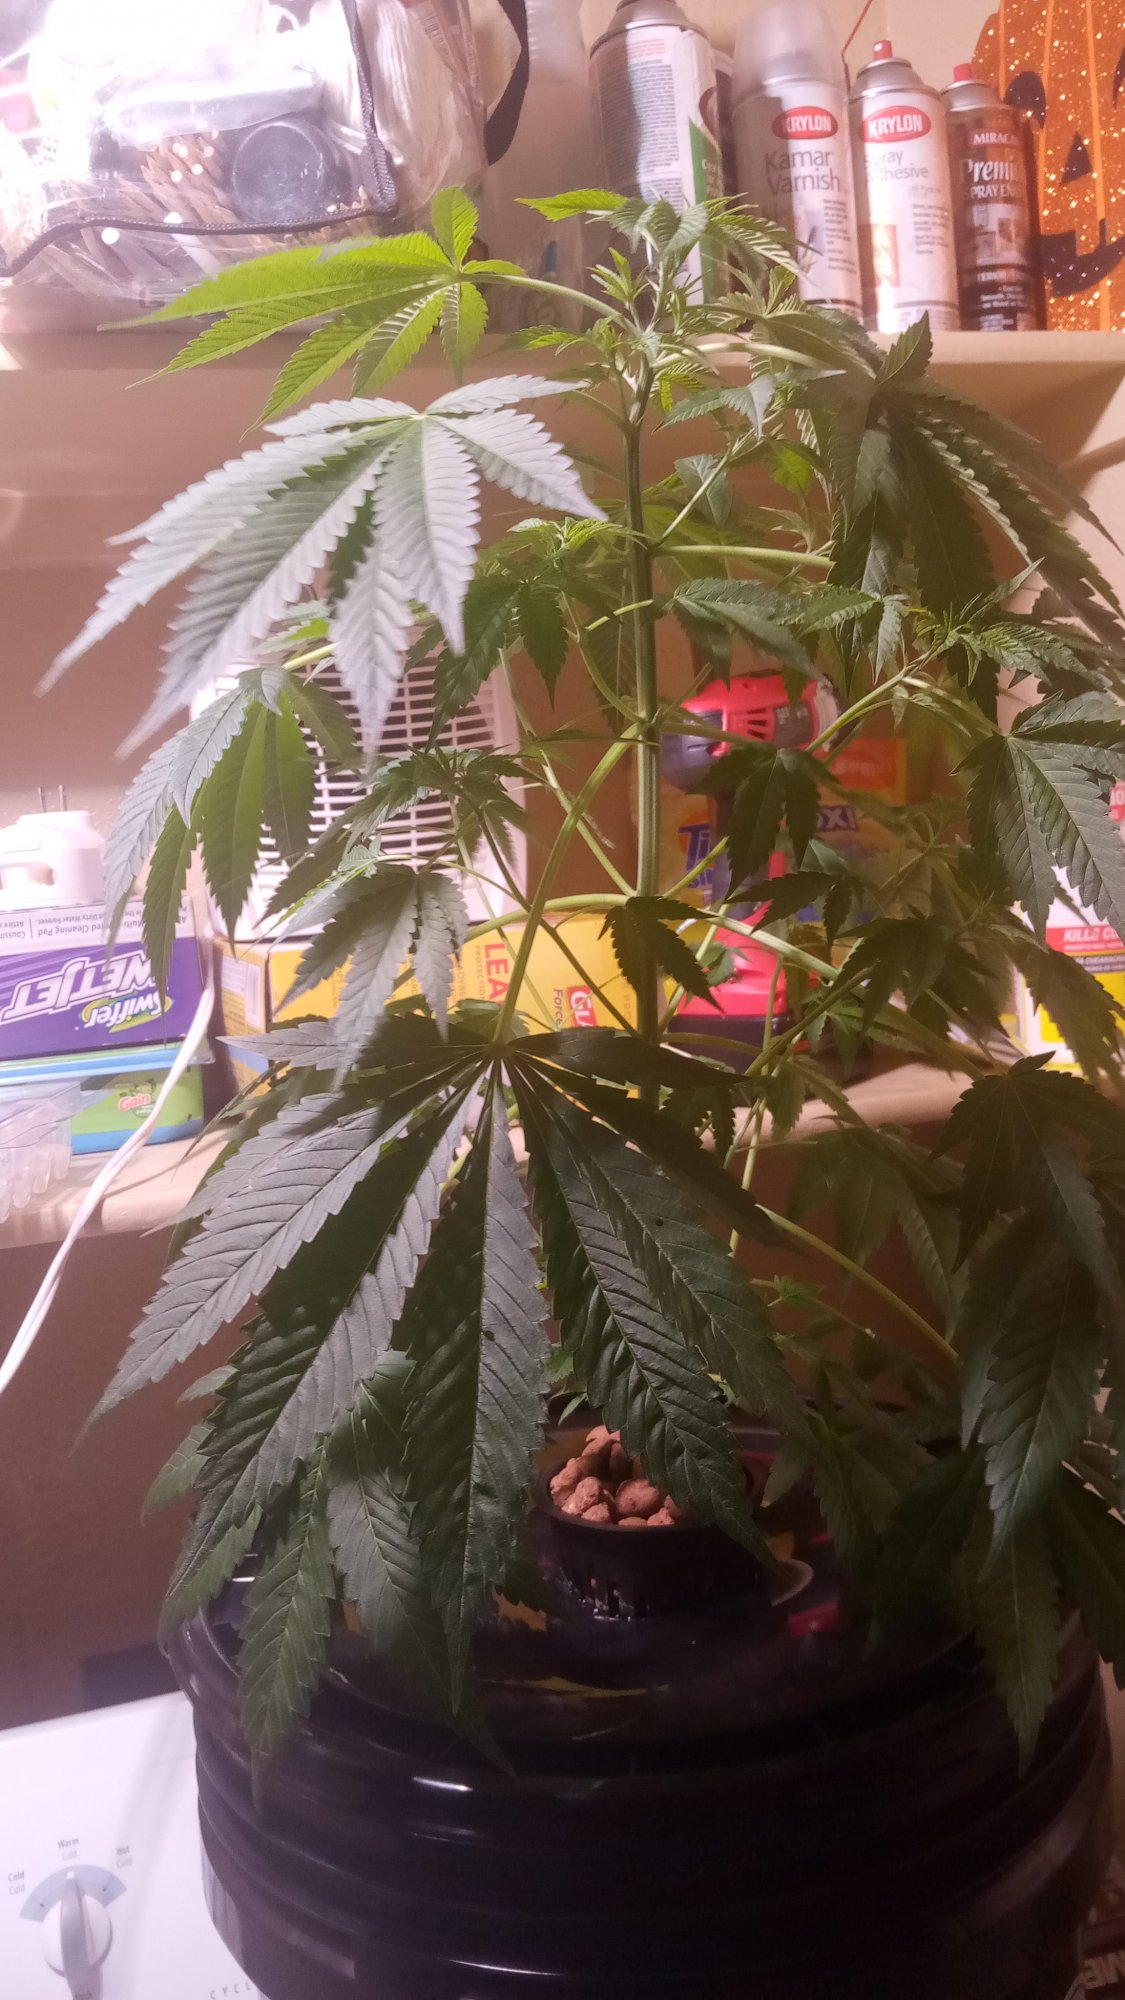 1st dwc and plant looks a little droopy and i cant tell if im in the flowering stage or not th 2